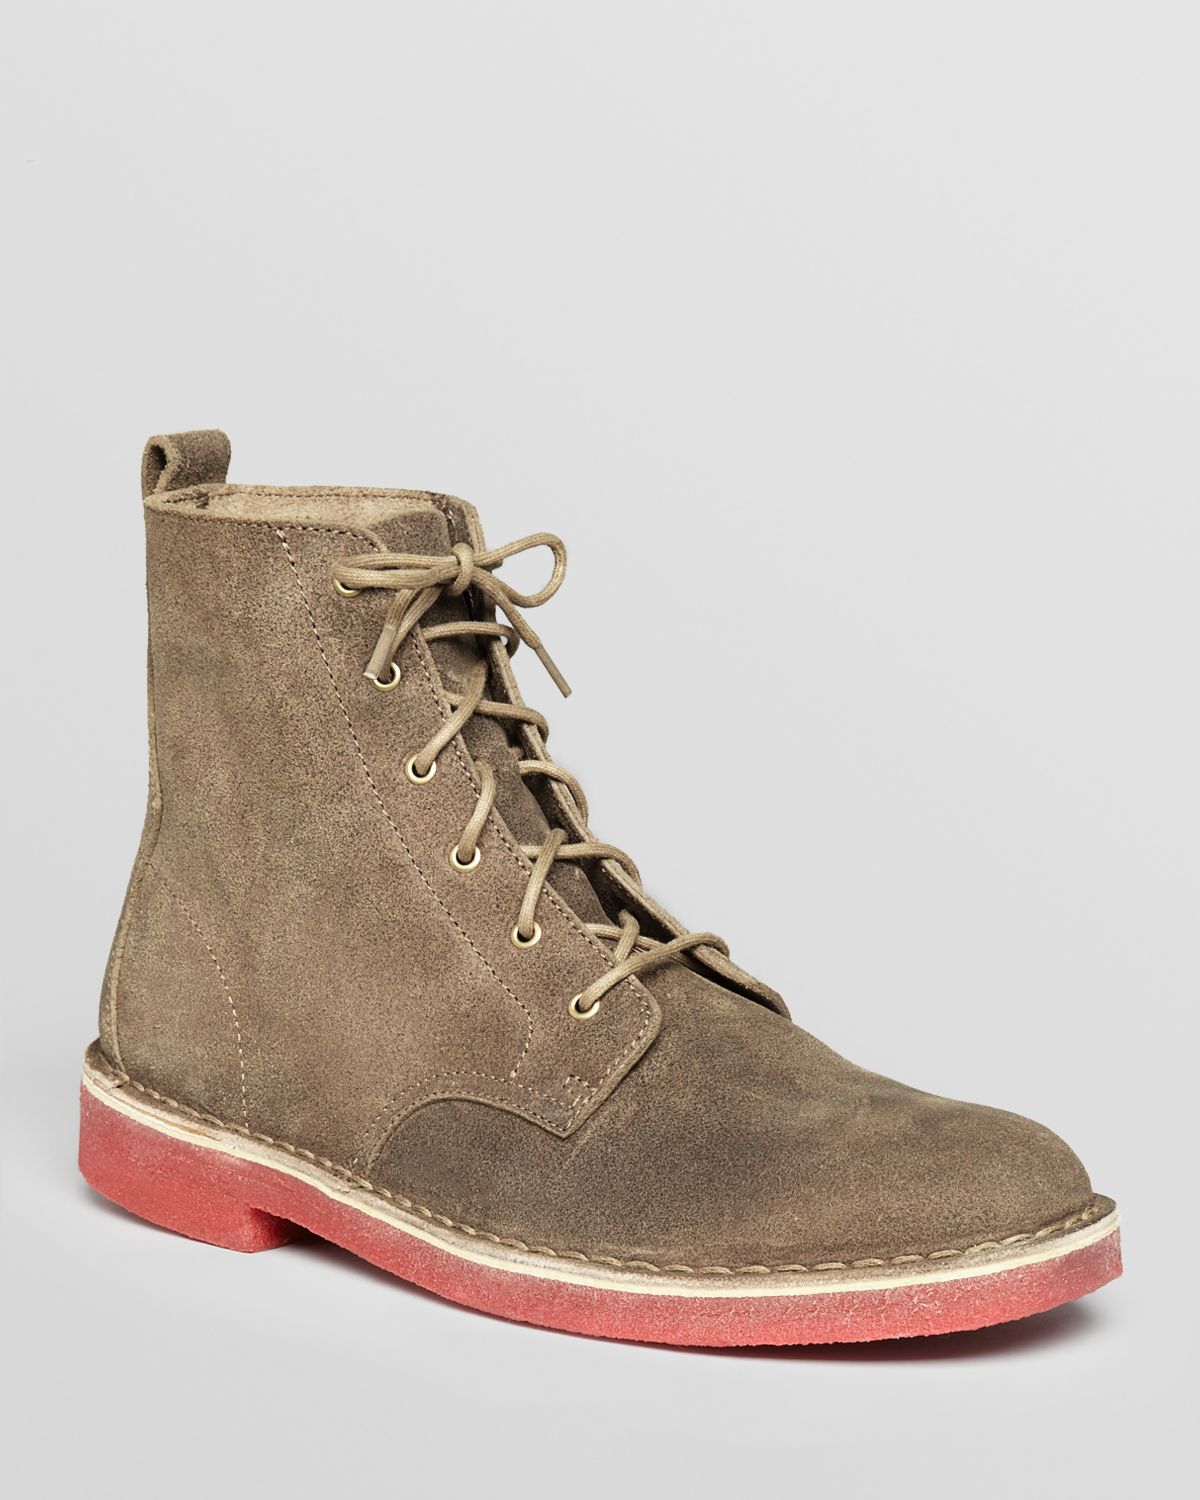 Clarks Desert Mali Suede Boots in Taupe (Natural) for Men - Lyst